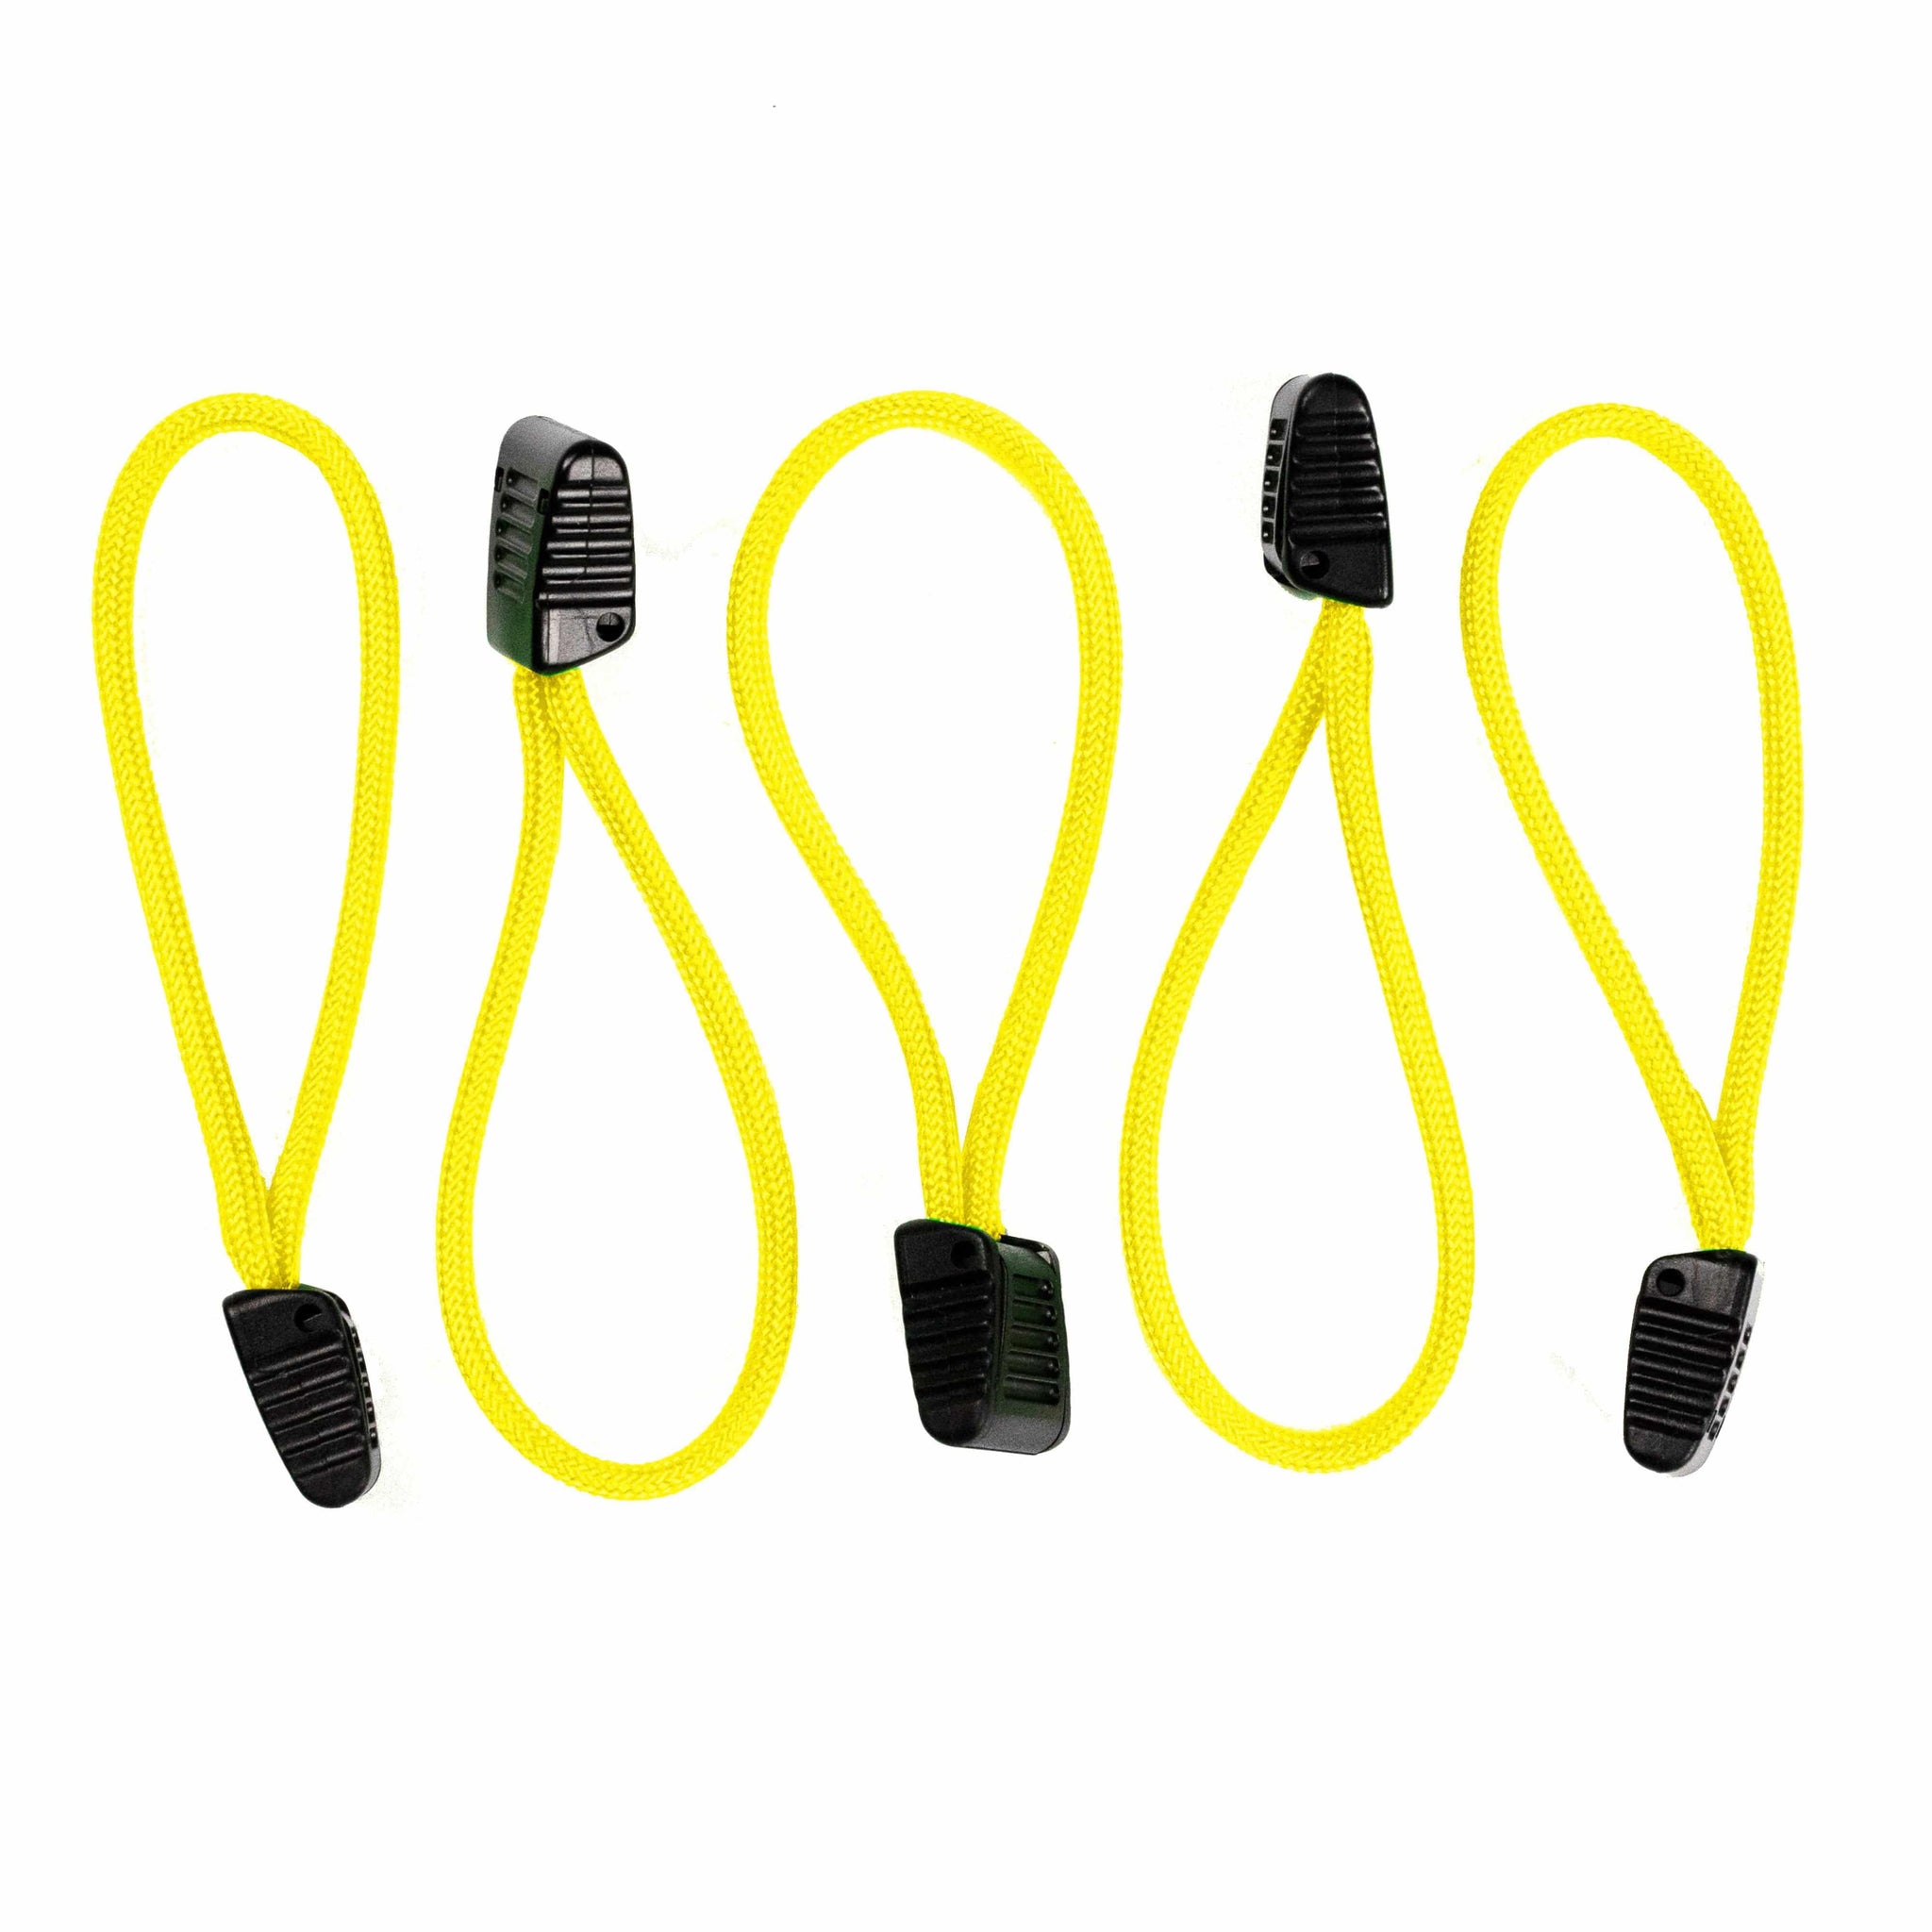 Bartact Paracord Zipper Pulls w/ Plastic Pull - Qty 3 or 5 - Made in USA 550 Paracord, Yellow